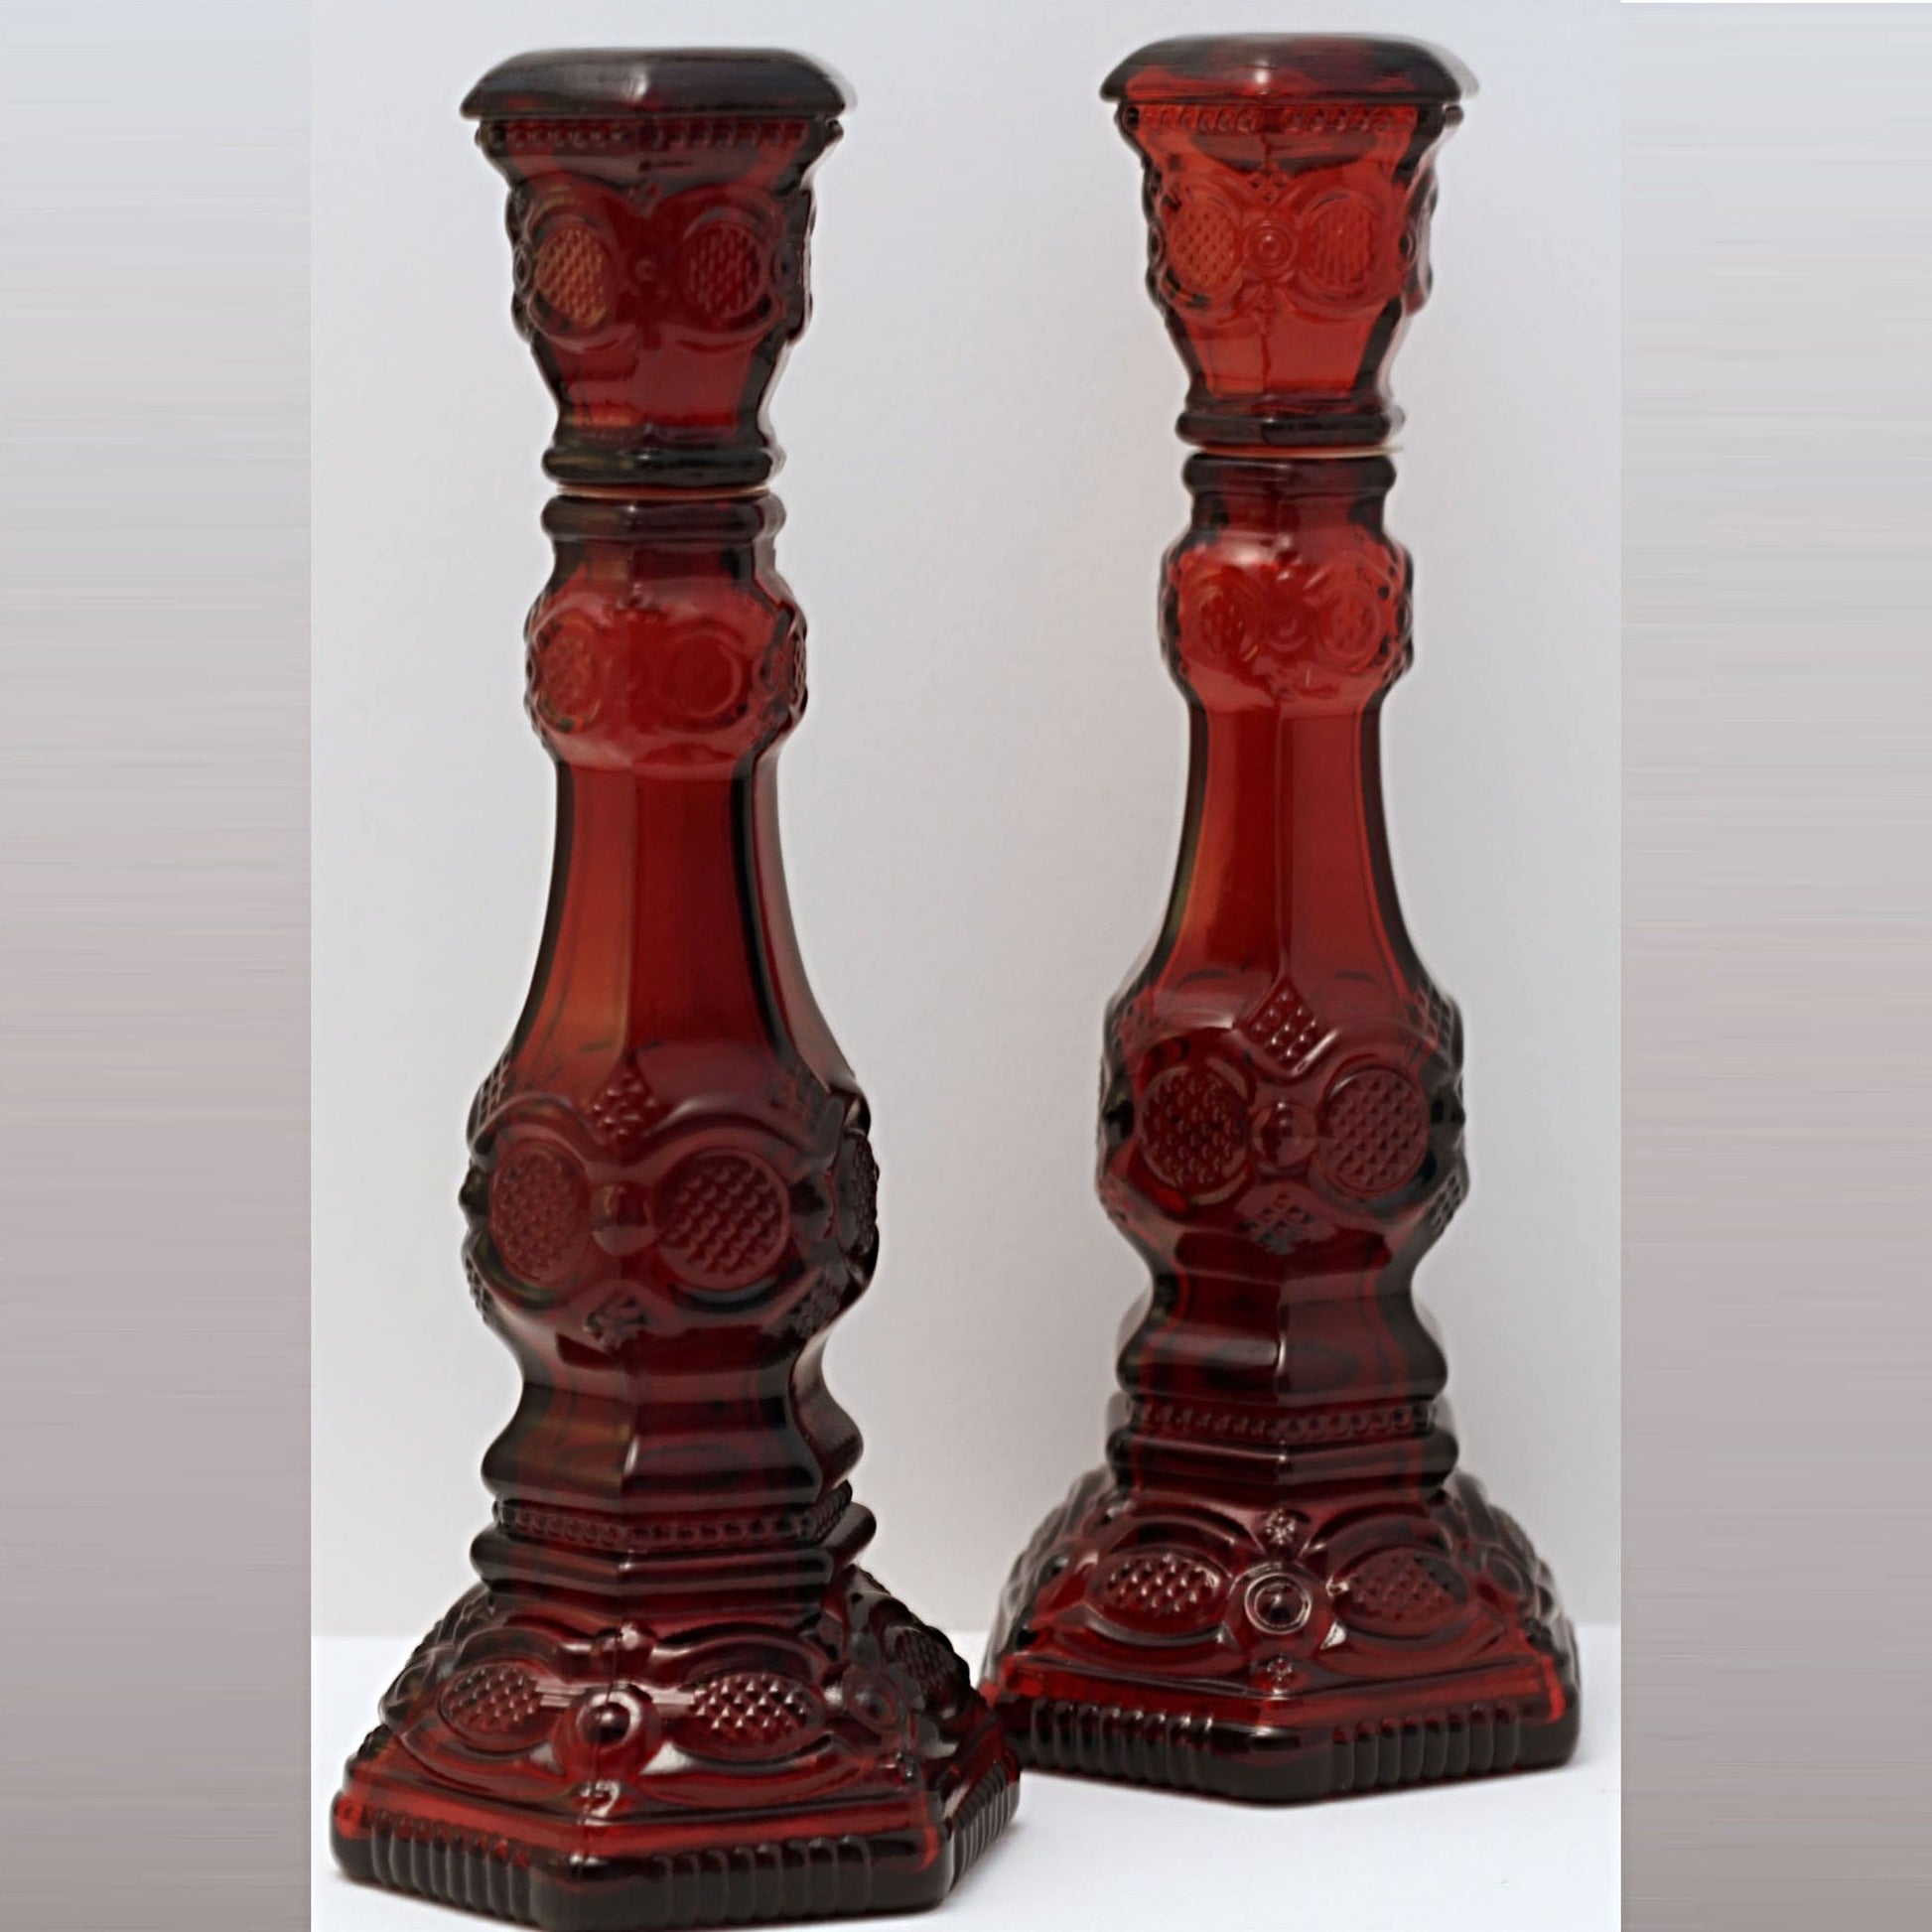 CAPE COD 1876 COLLECTION By Avon Set of Two Tall Candlesticks